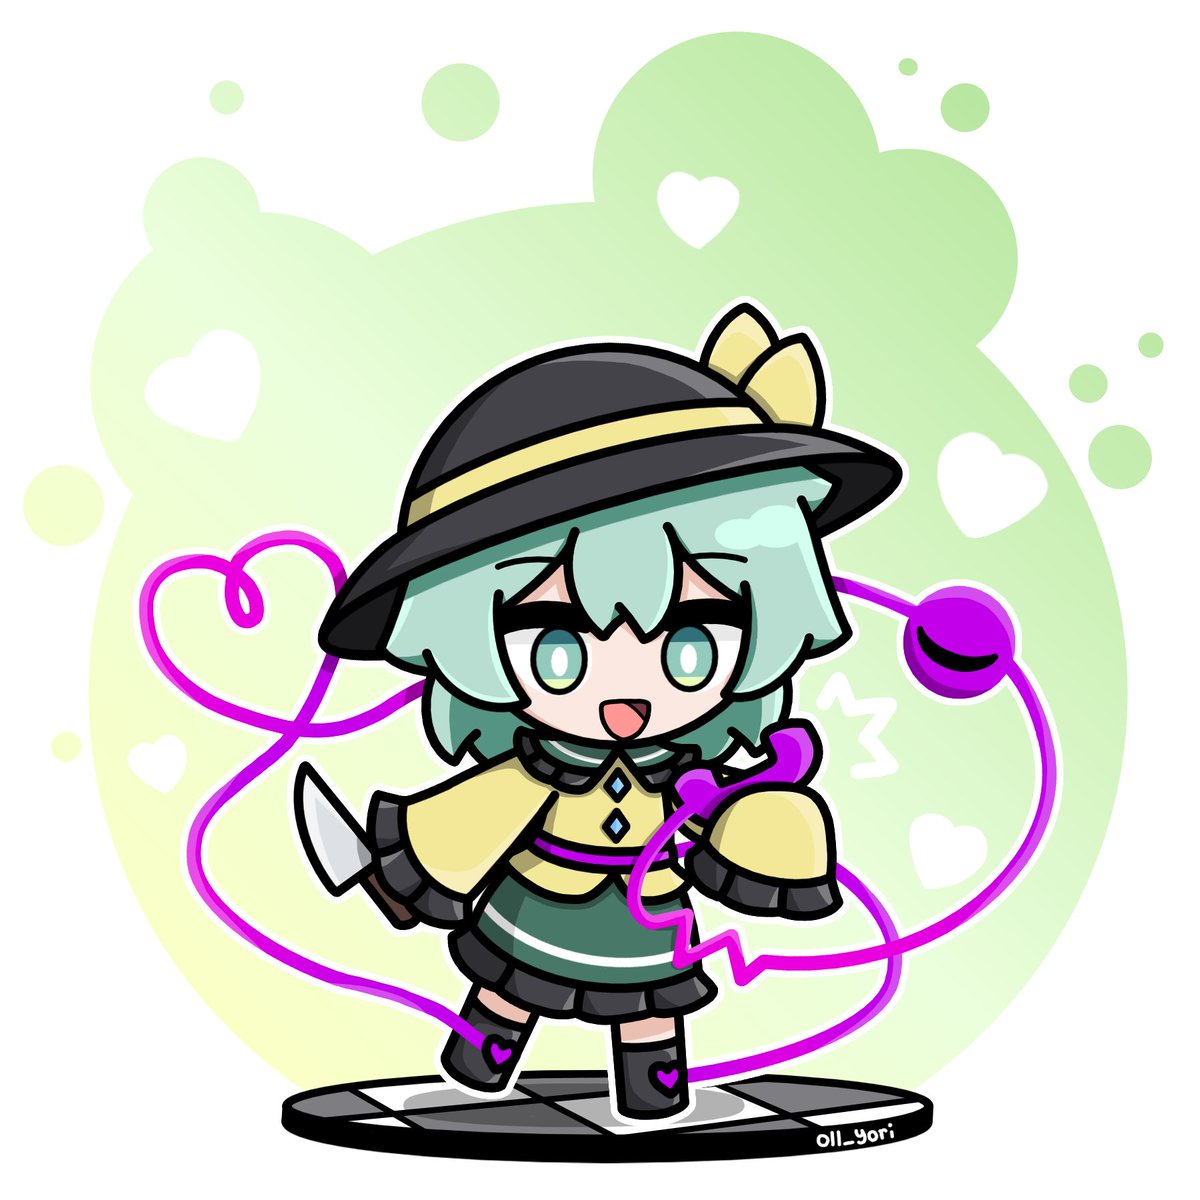 #touhou #東方Project #touhouproject
Koishi💜